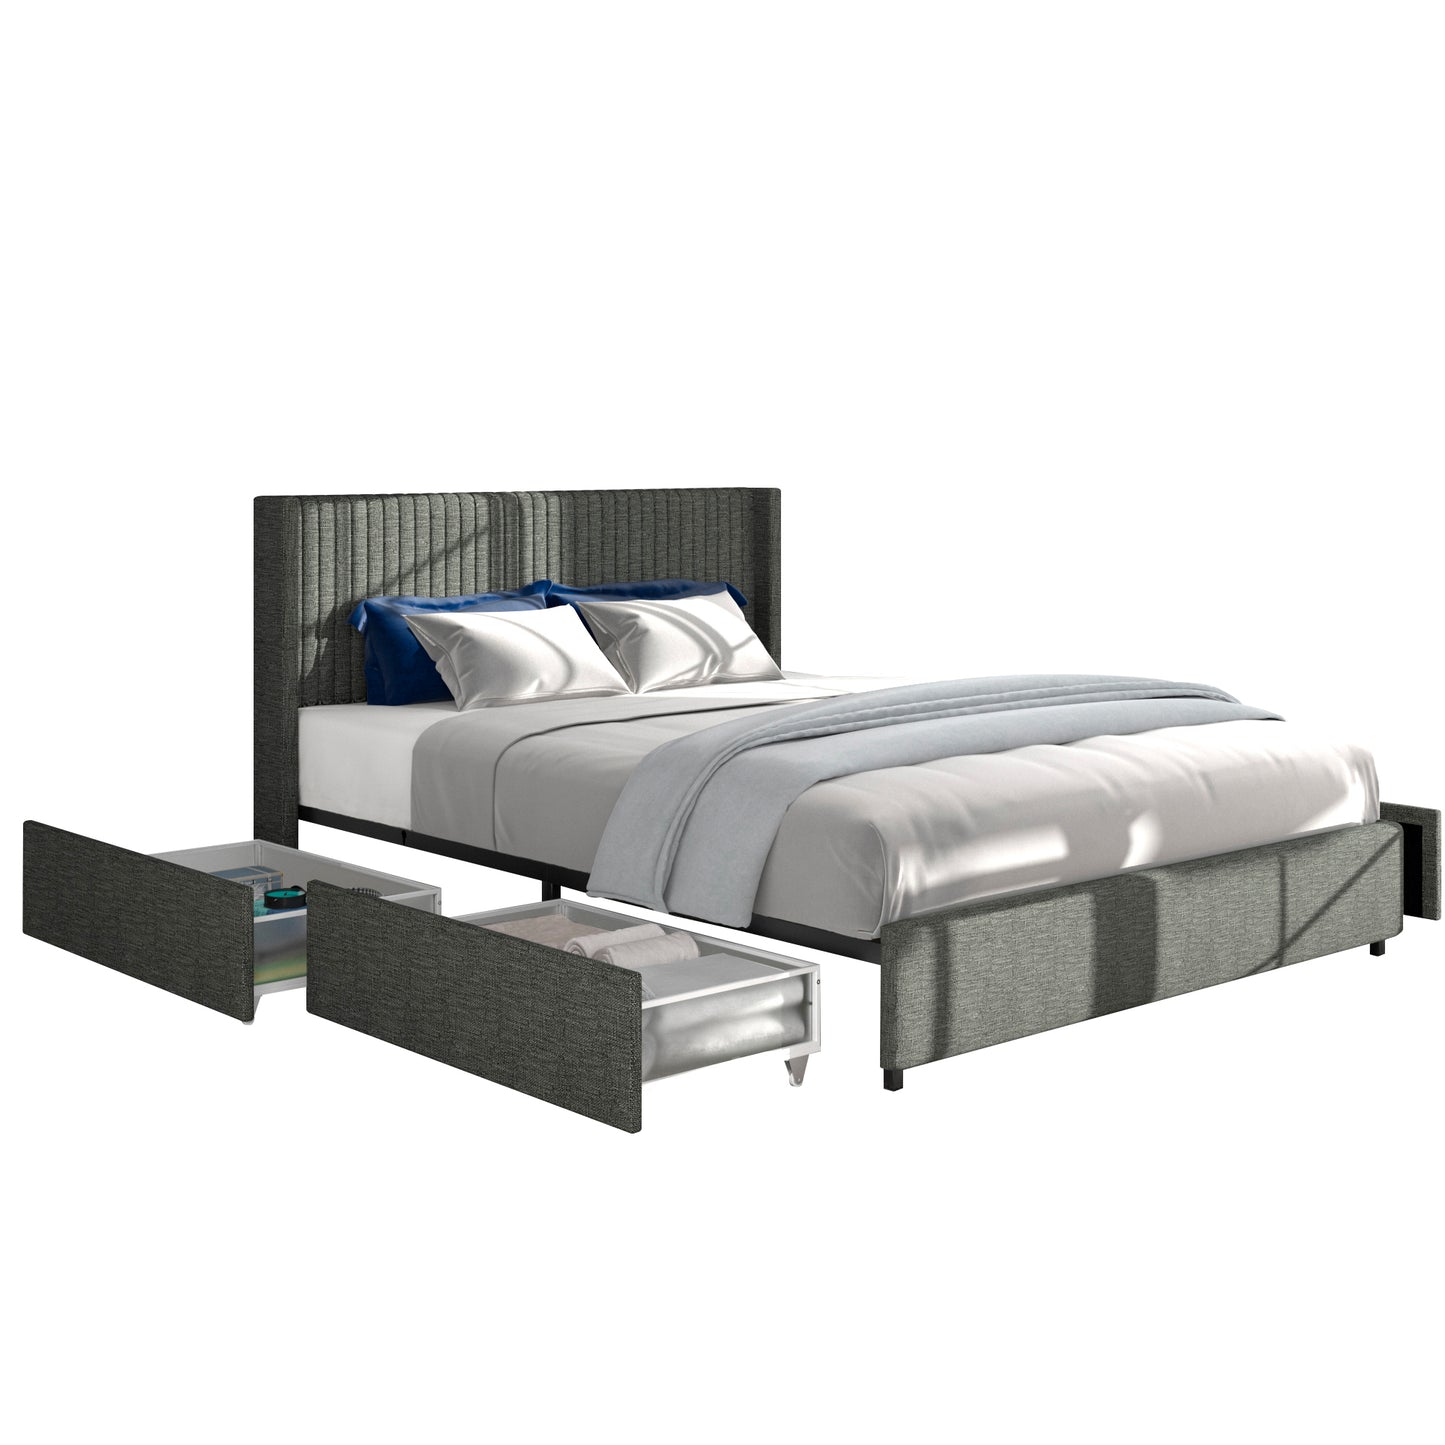 Anna Full Size Gray Velvet Upholstered Wingback Platform Bed with Patented 4 Drawers Storage, Modern Design Headboard with Tight Channel, Wooden Slat Mattress Support No Box Spring Needed